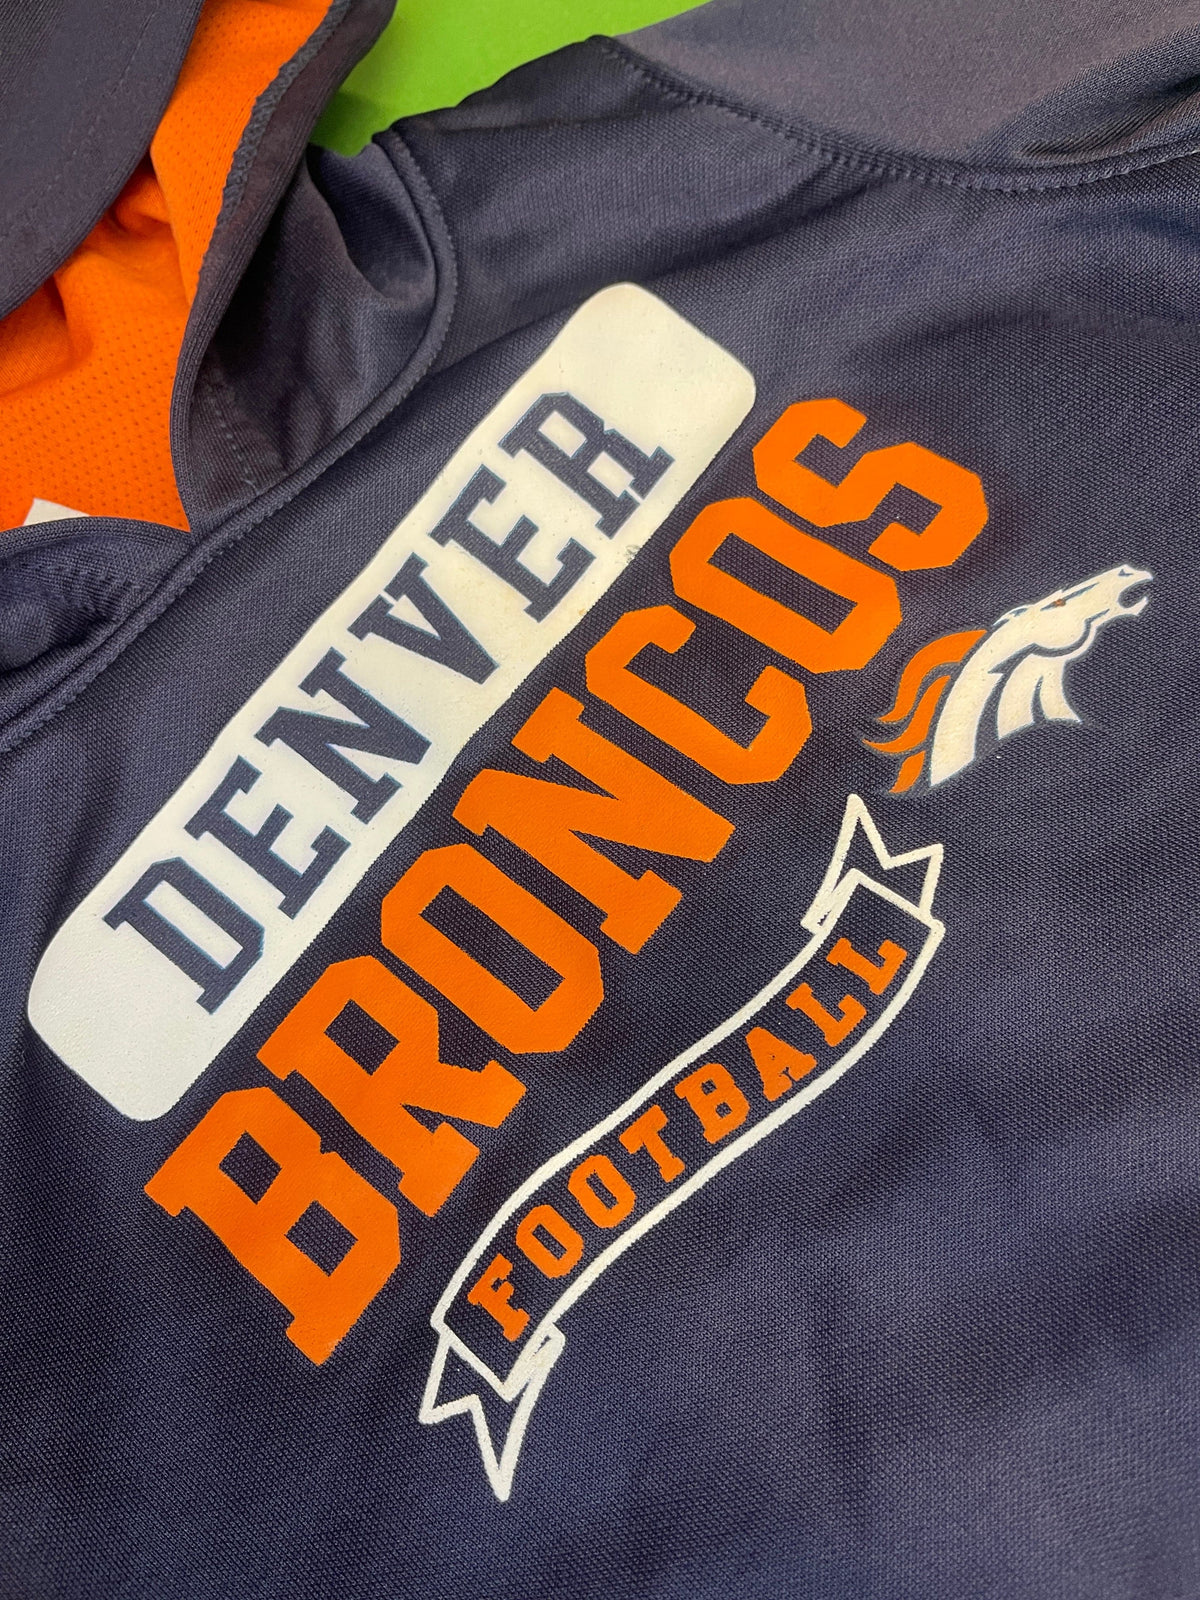 NFL Denver Broncos Navy Blue Pullover Hoodie Youth X-Small 4T